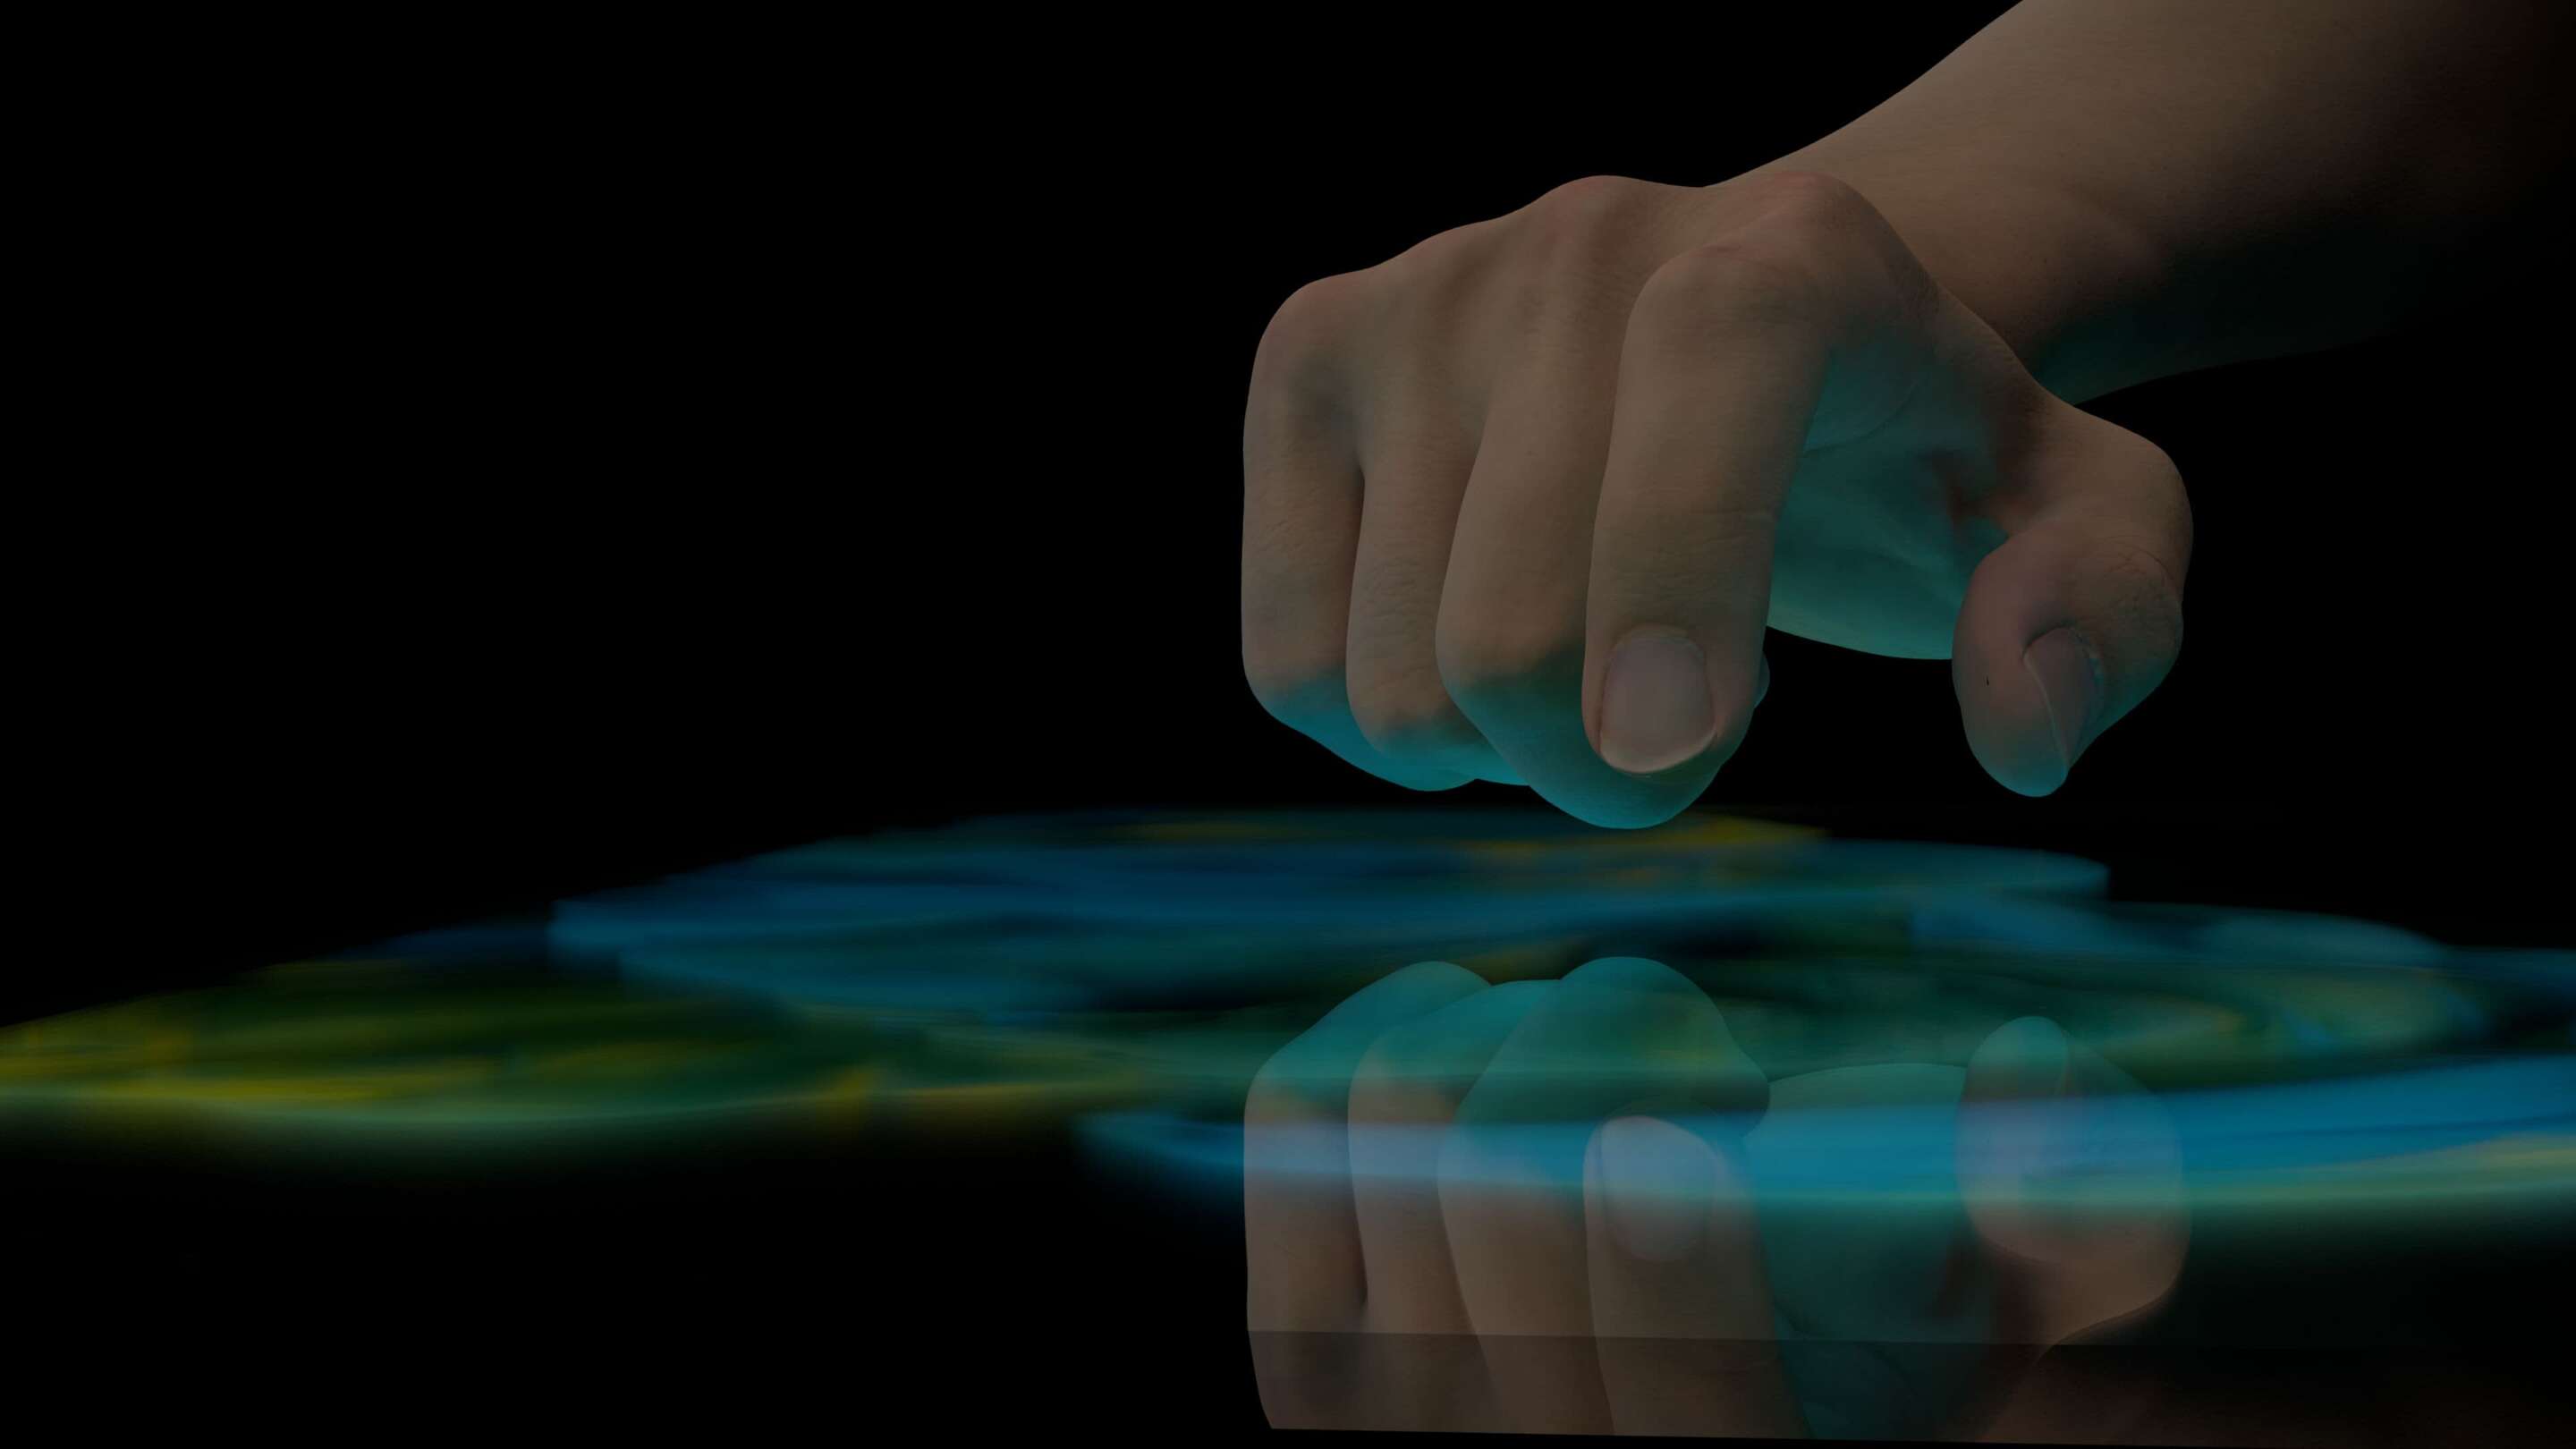 Design - Let us impress you a close-up of a hand touching a touch screen